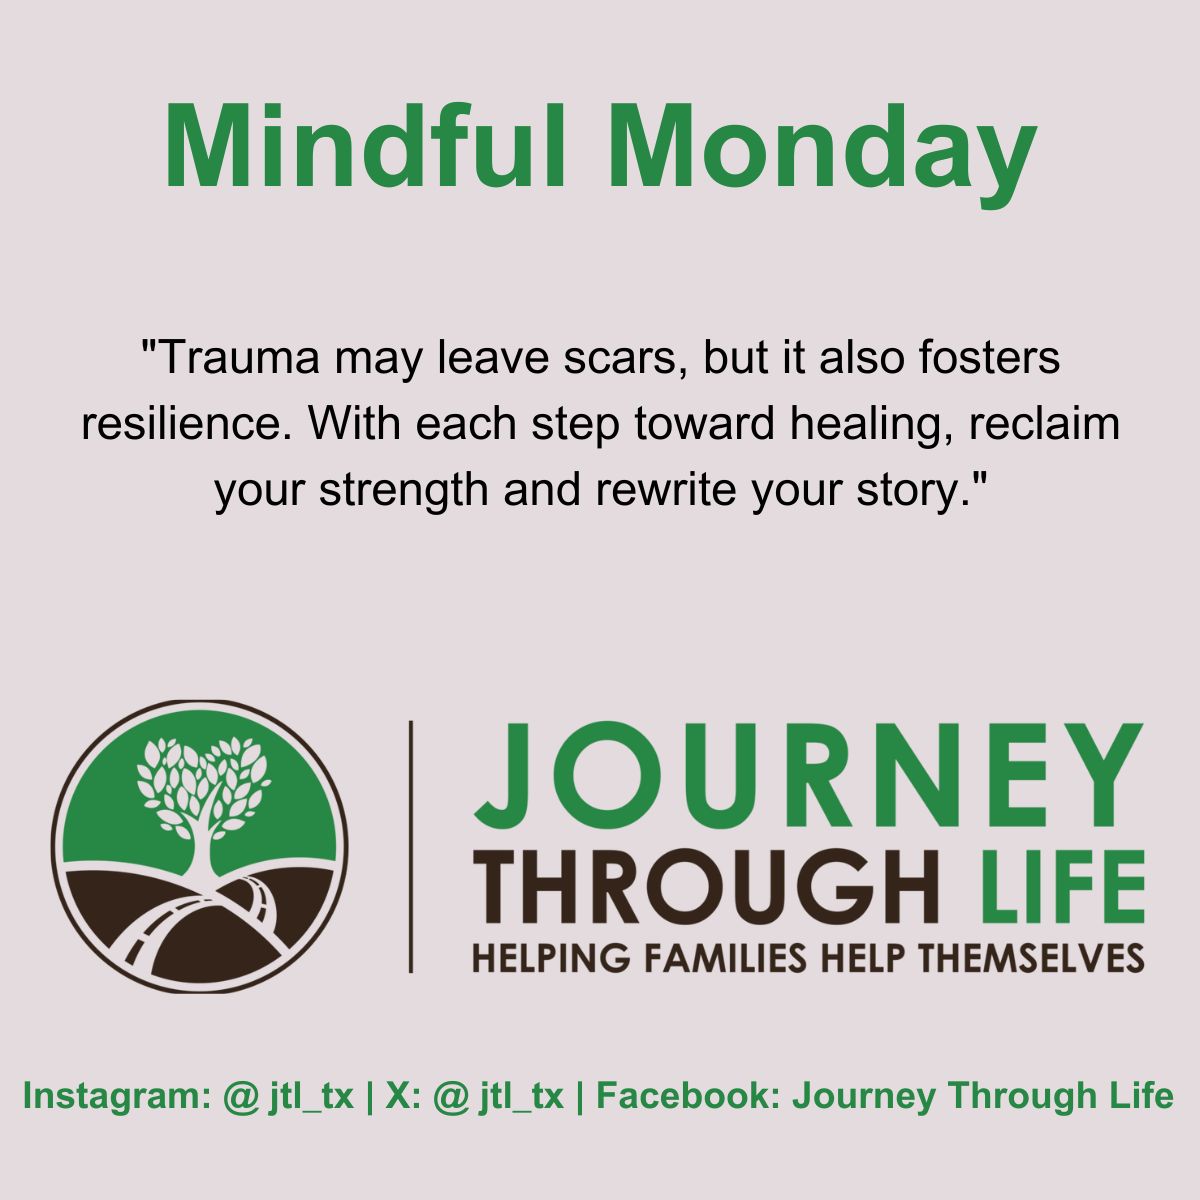 💫✨ #MindfulMonday: Trauma isn't the end; it's part of your journey. Embrace healing, reclaim your strength, and rewrite your story. You're stronger than scars! #Mindfulness #Resilience #Healing #Mentalhealthmatters